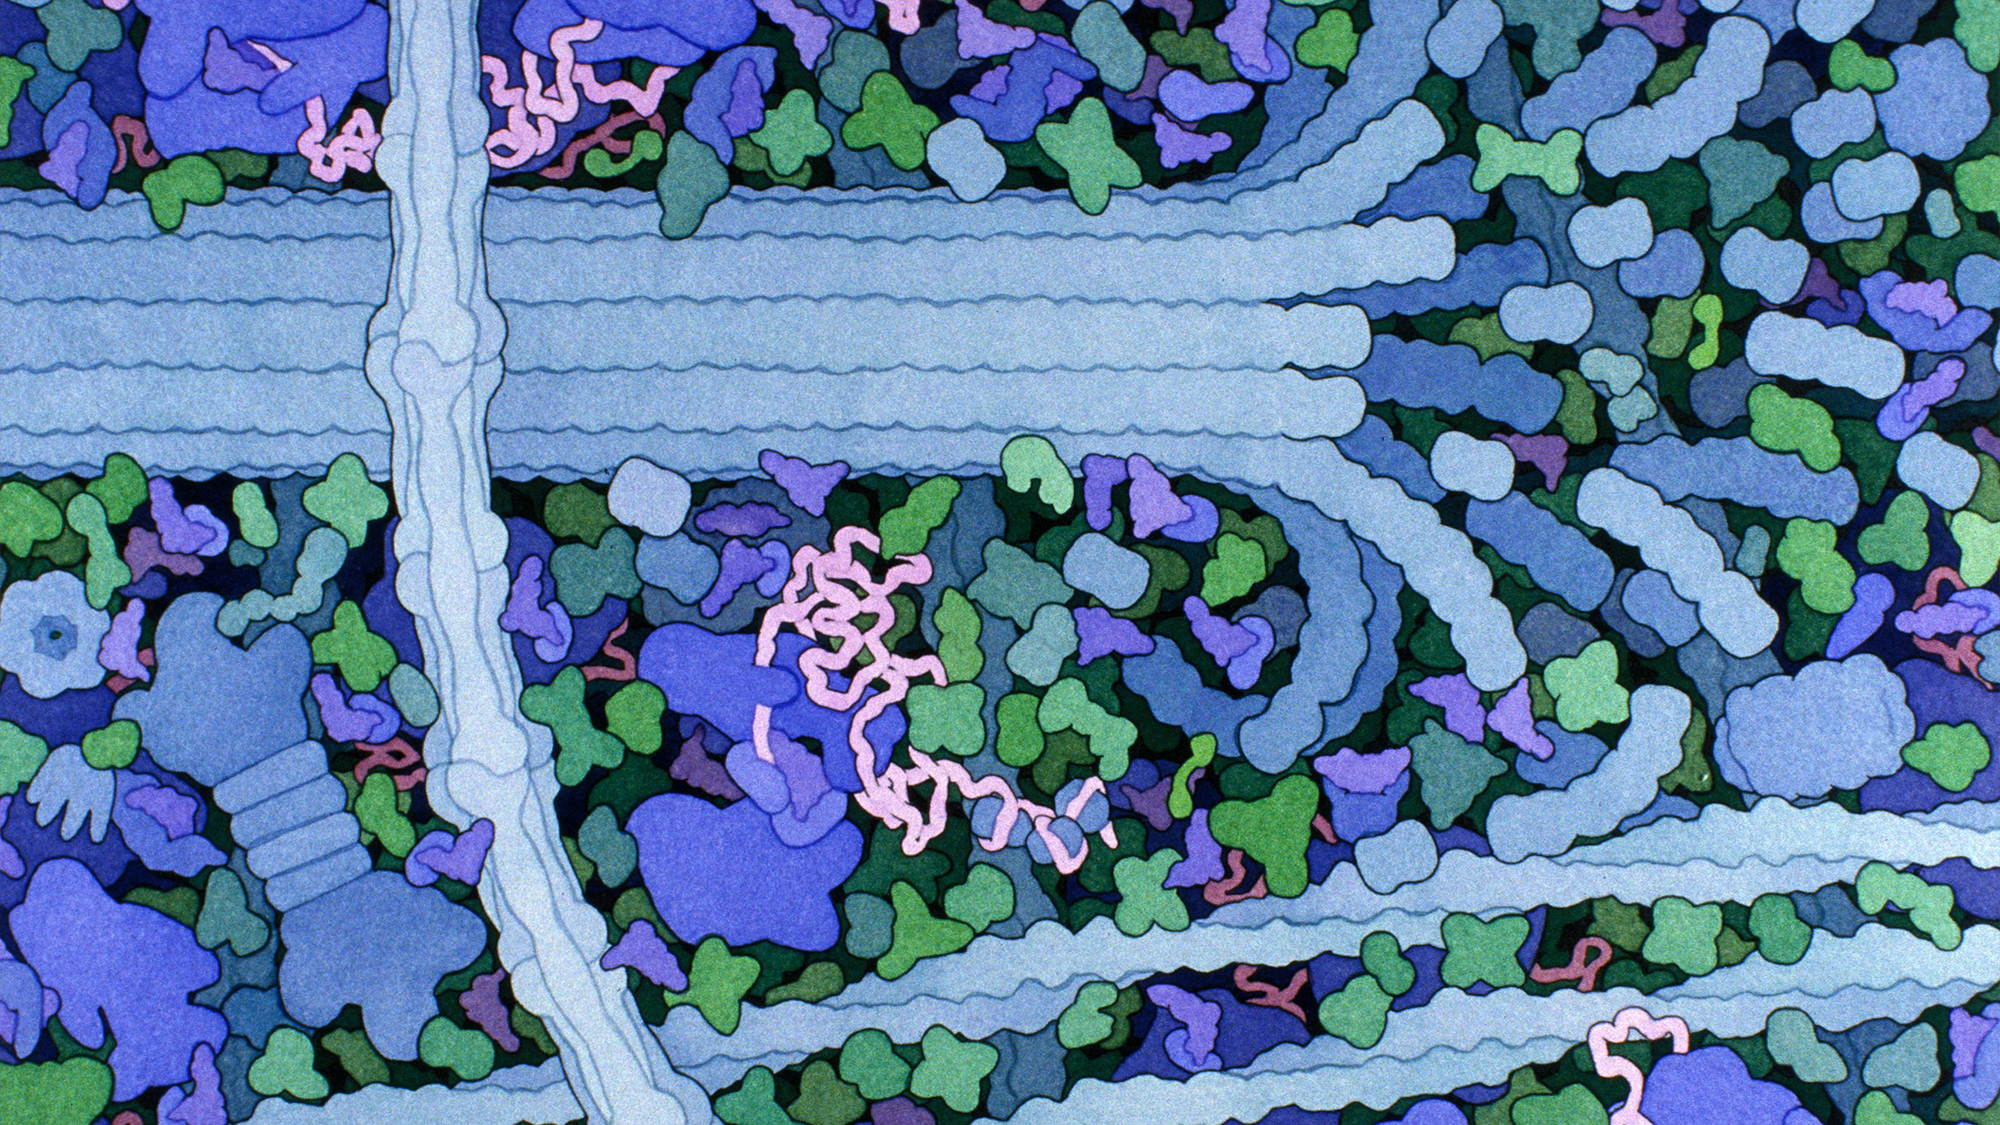 Artem Komissarov studies the molecular transport within neurons. Illustration by David S. Goodsell, the Scripps Research Institute.